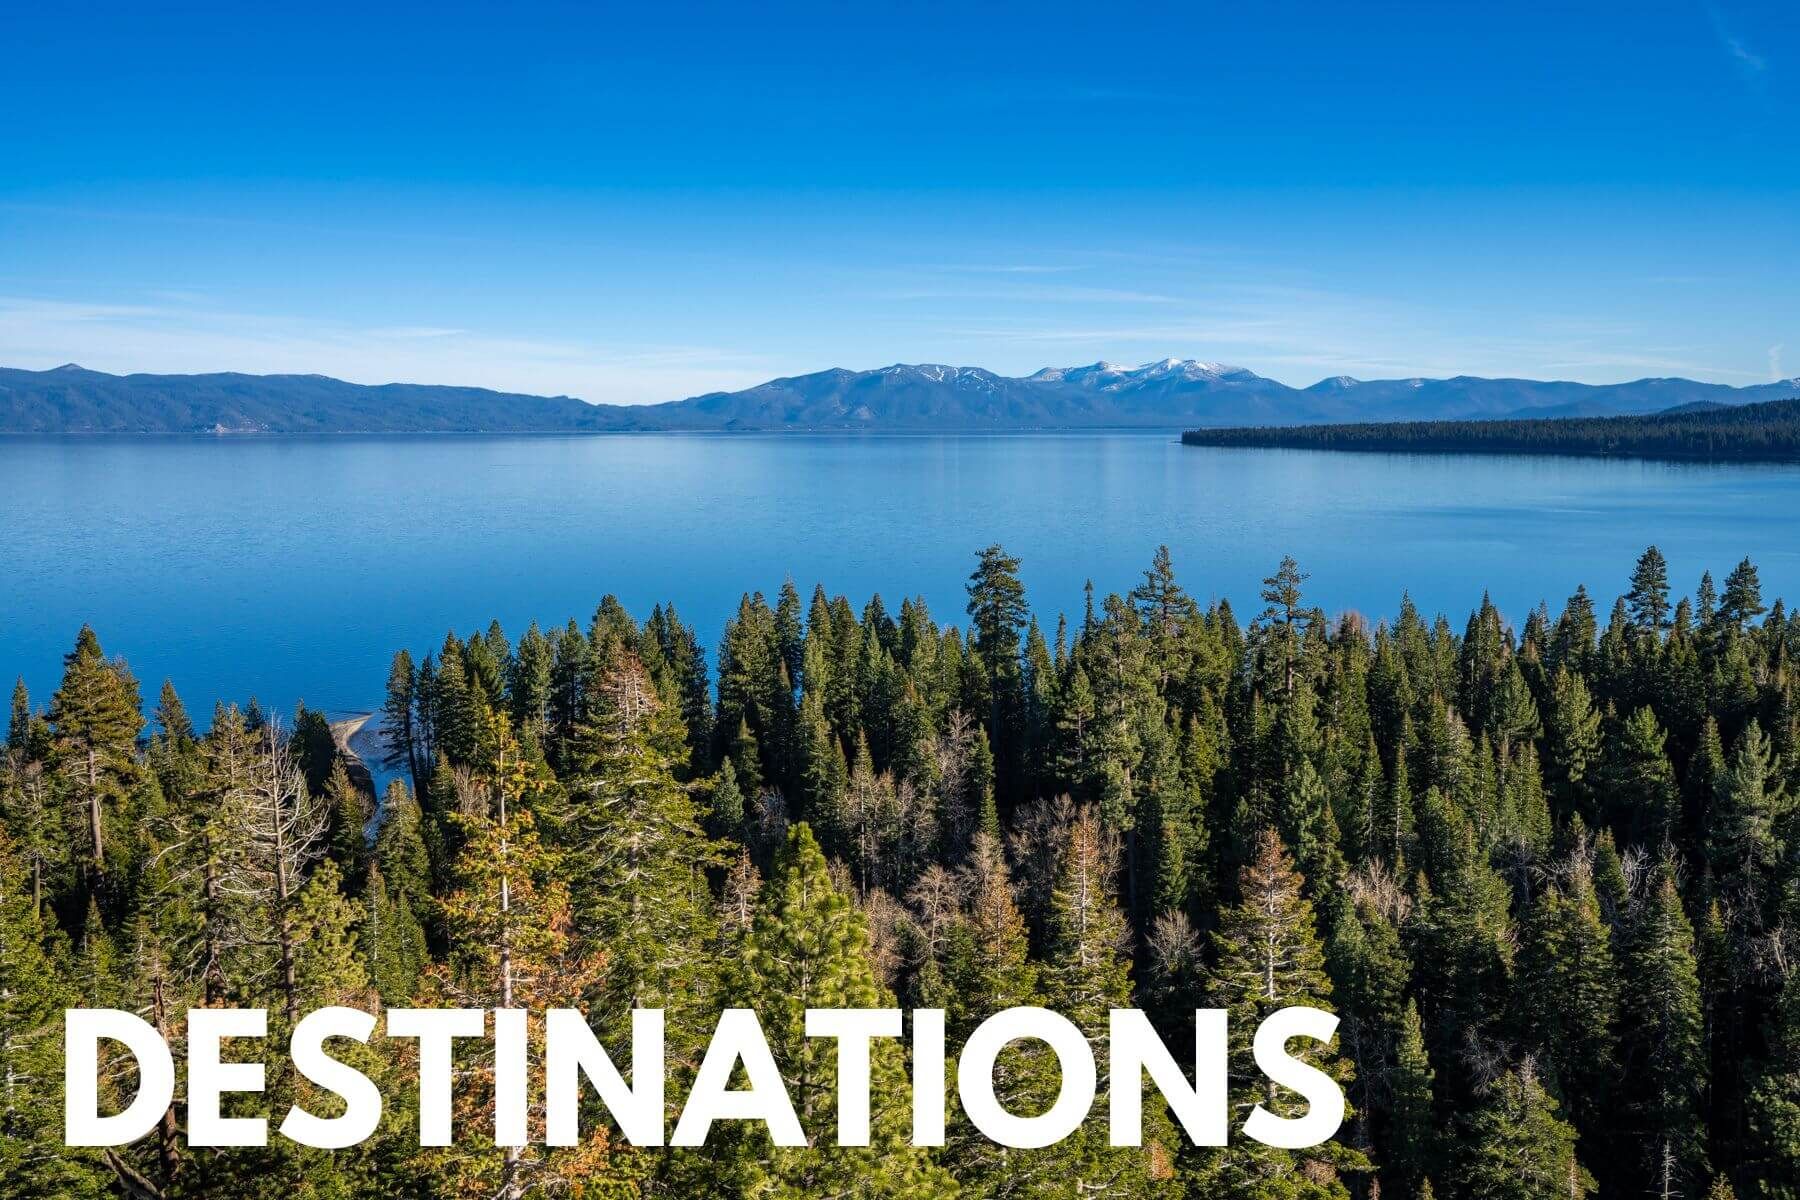 Photo of a view looking at the tops of trees leading to a lake and mountains in the distance with the word Destinations overlaid